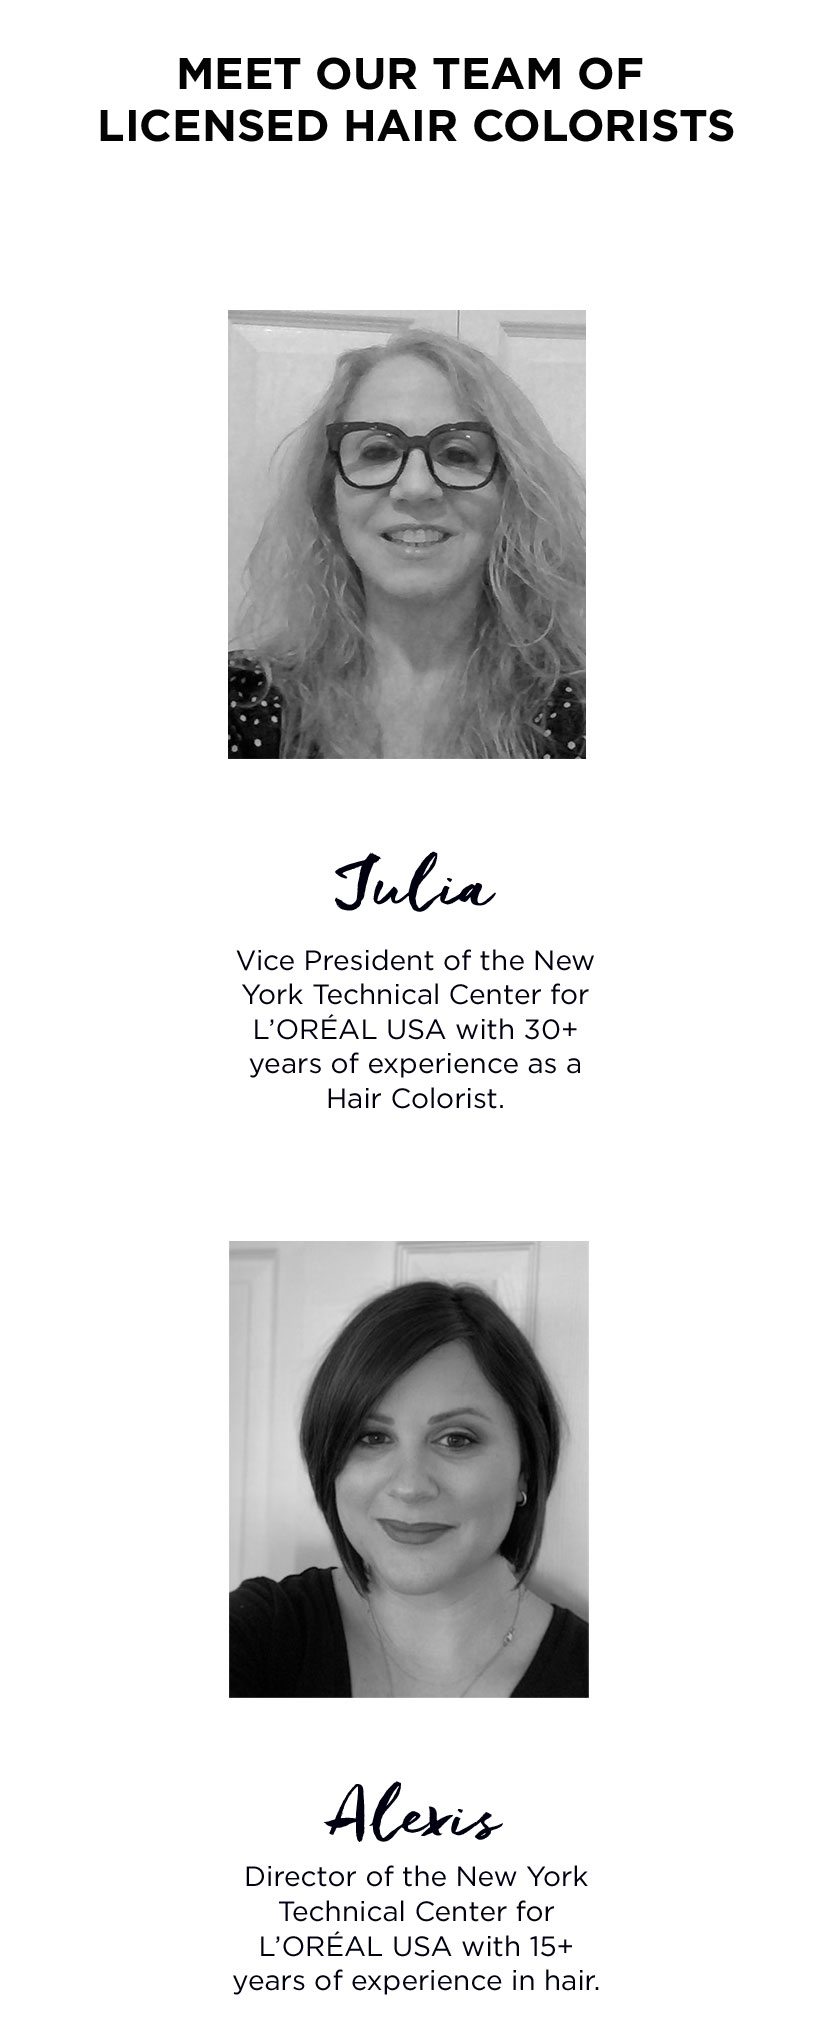 Julia-VP of the NY Technical Center for L'Oréal USA with 30 plus years of experience as a Hair Colorist. - Alexis-Director of the NY Technical Center for L'Oréal USA with 15 plus years of experience in hair.